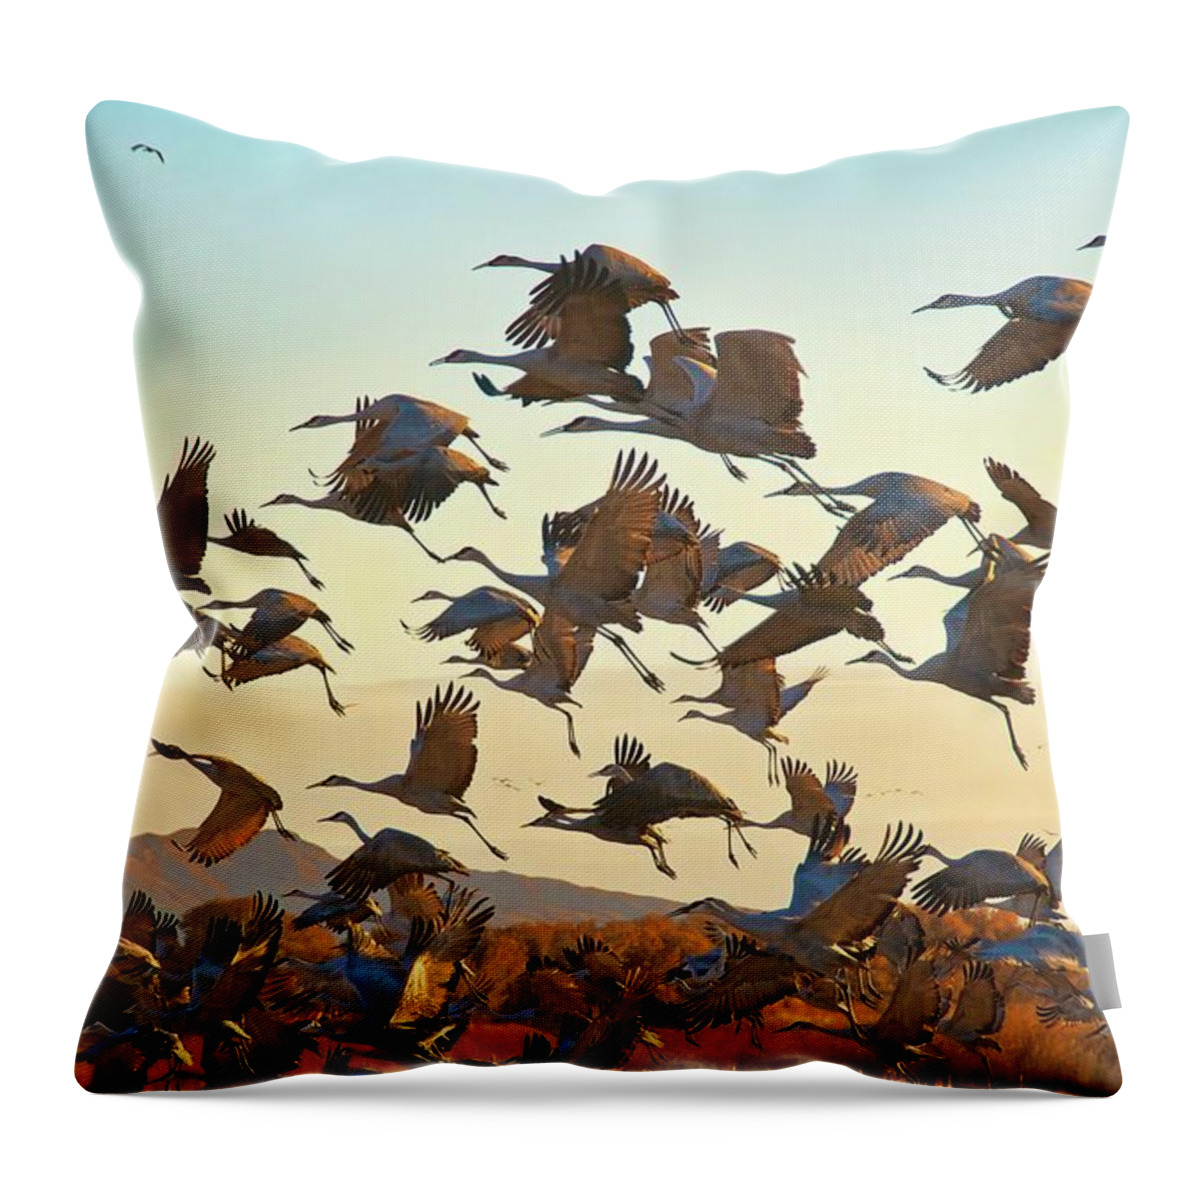 Nature Throw Pillow featuring the photograph Liftoff, Sandhill Cranes by Zayne Diamond Photographic